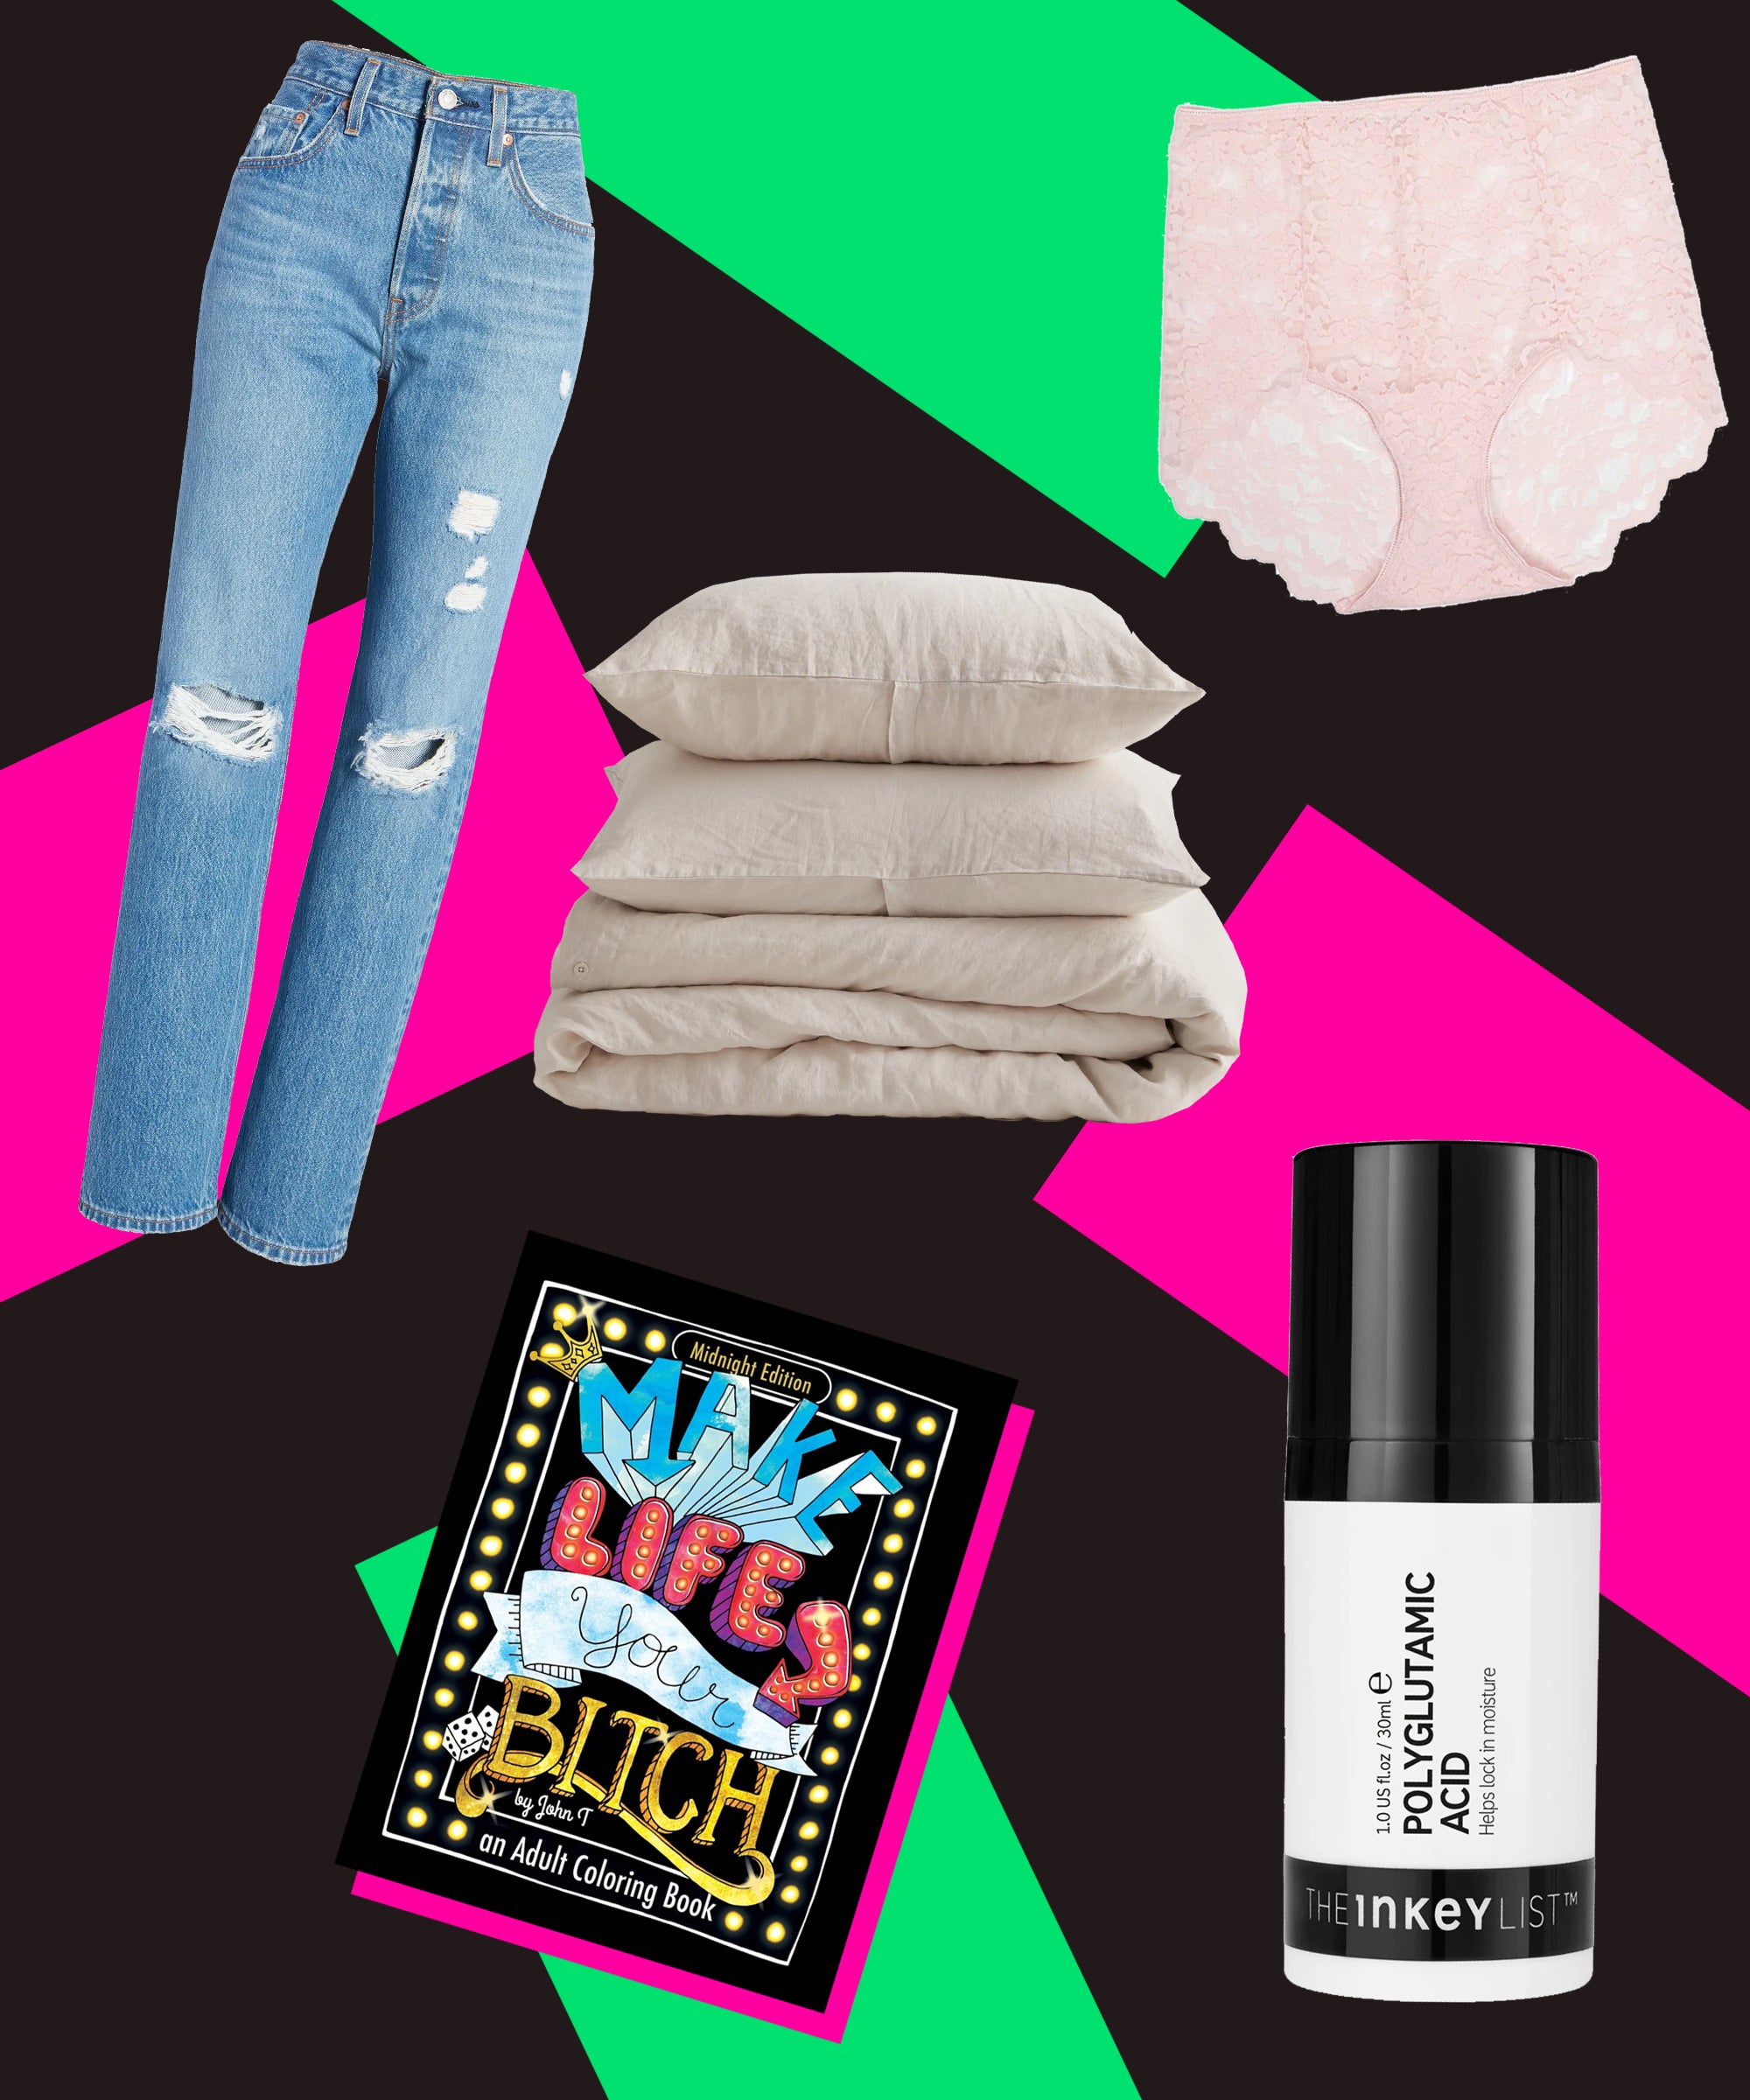 Best-Selling Products On Refinery29: March 2022